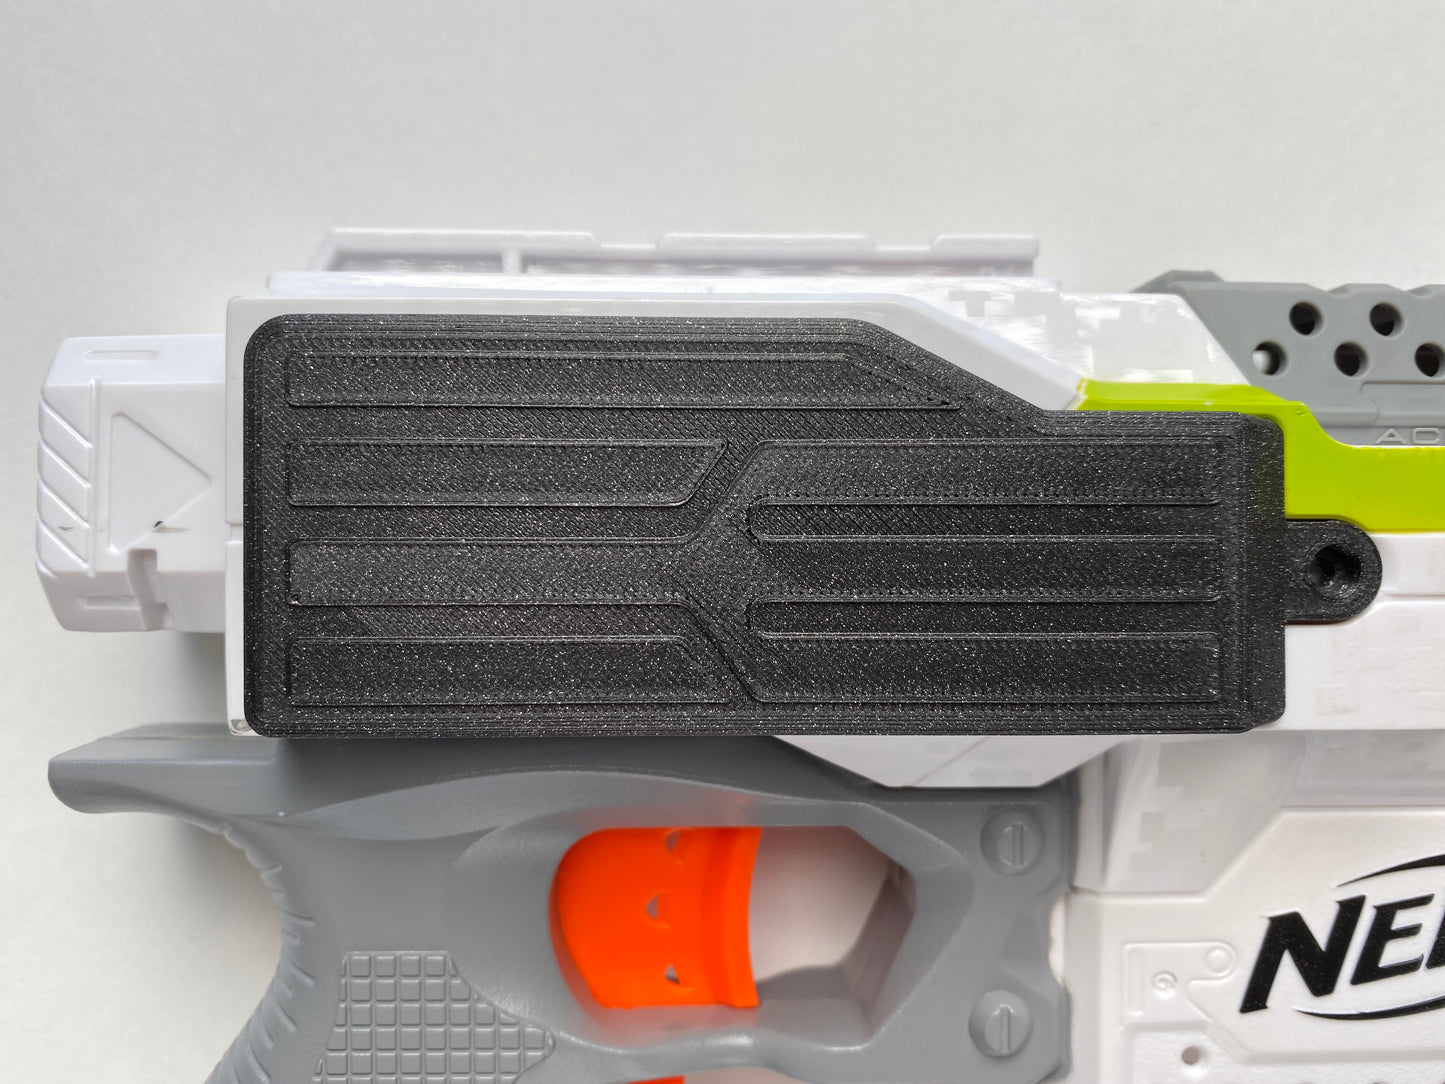 Stryfe Extended Battery Cover (2 sizes)